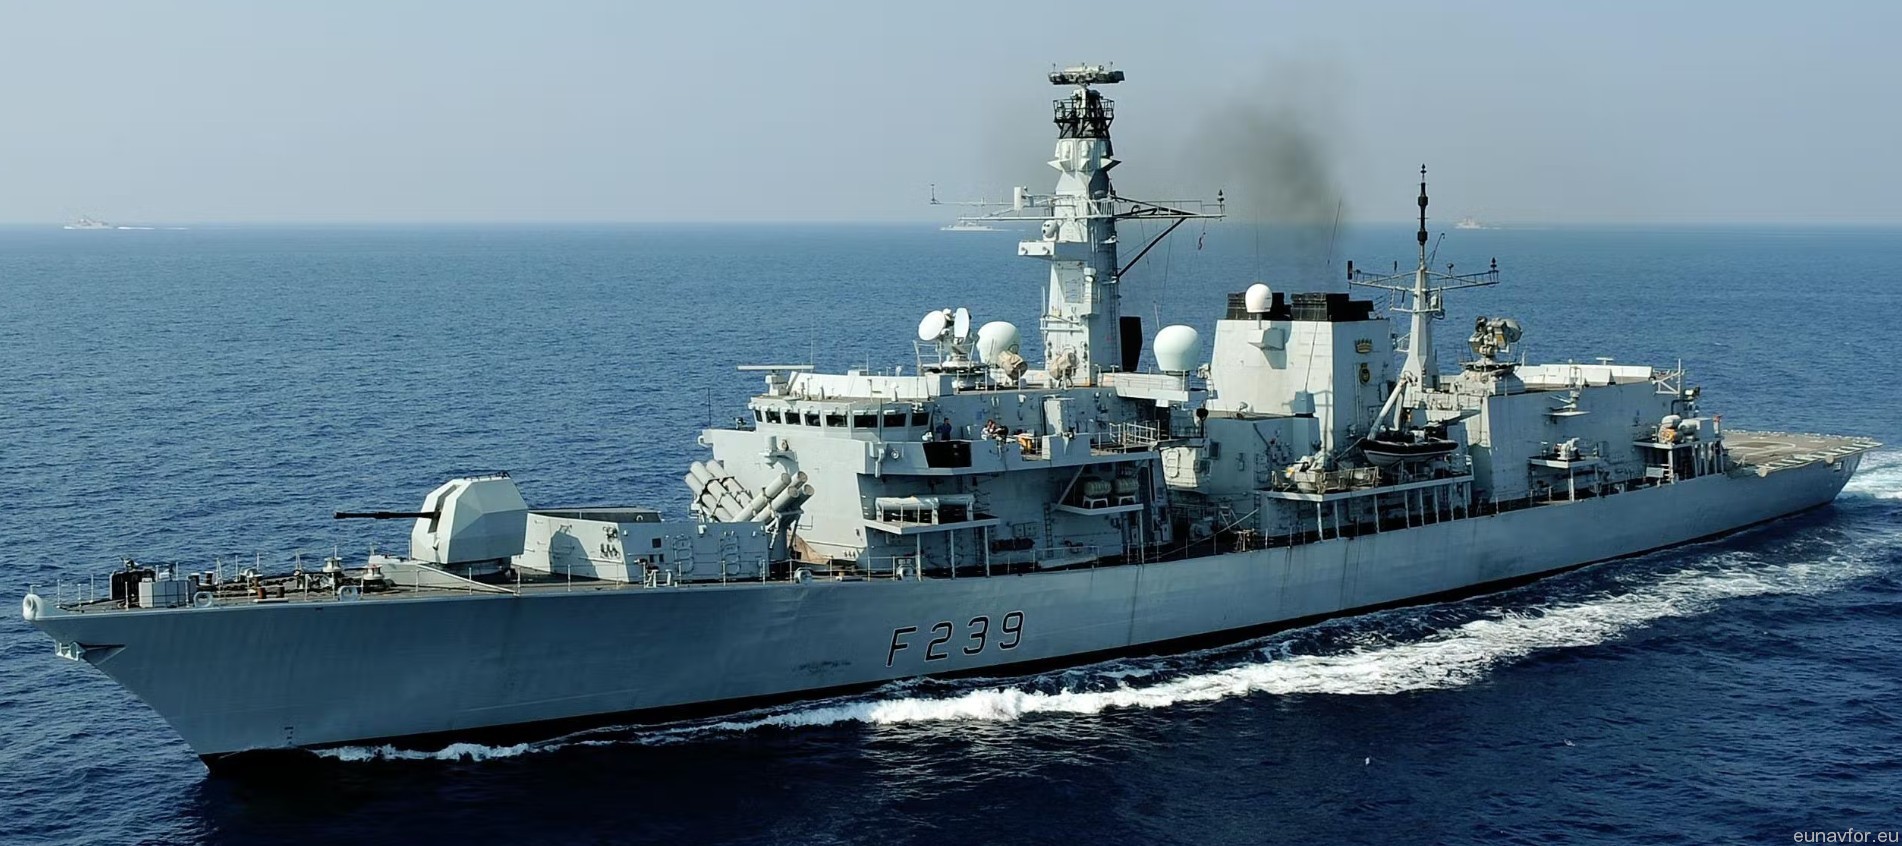 f-239 hms richmond type 23 duke class guided missile frigate ffg royal navy 40